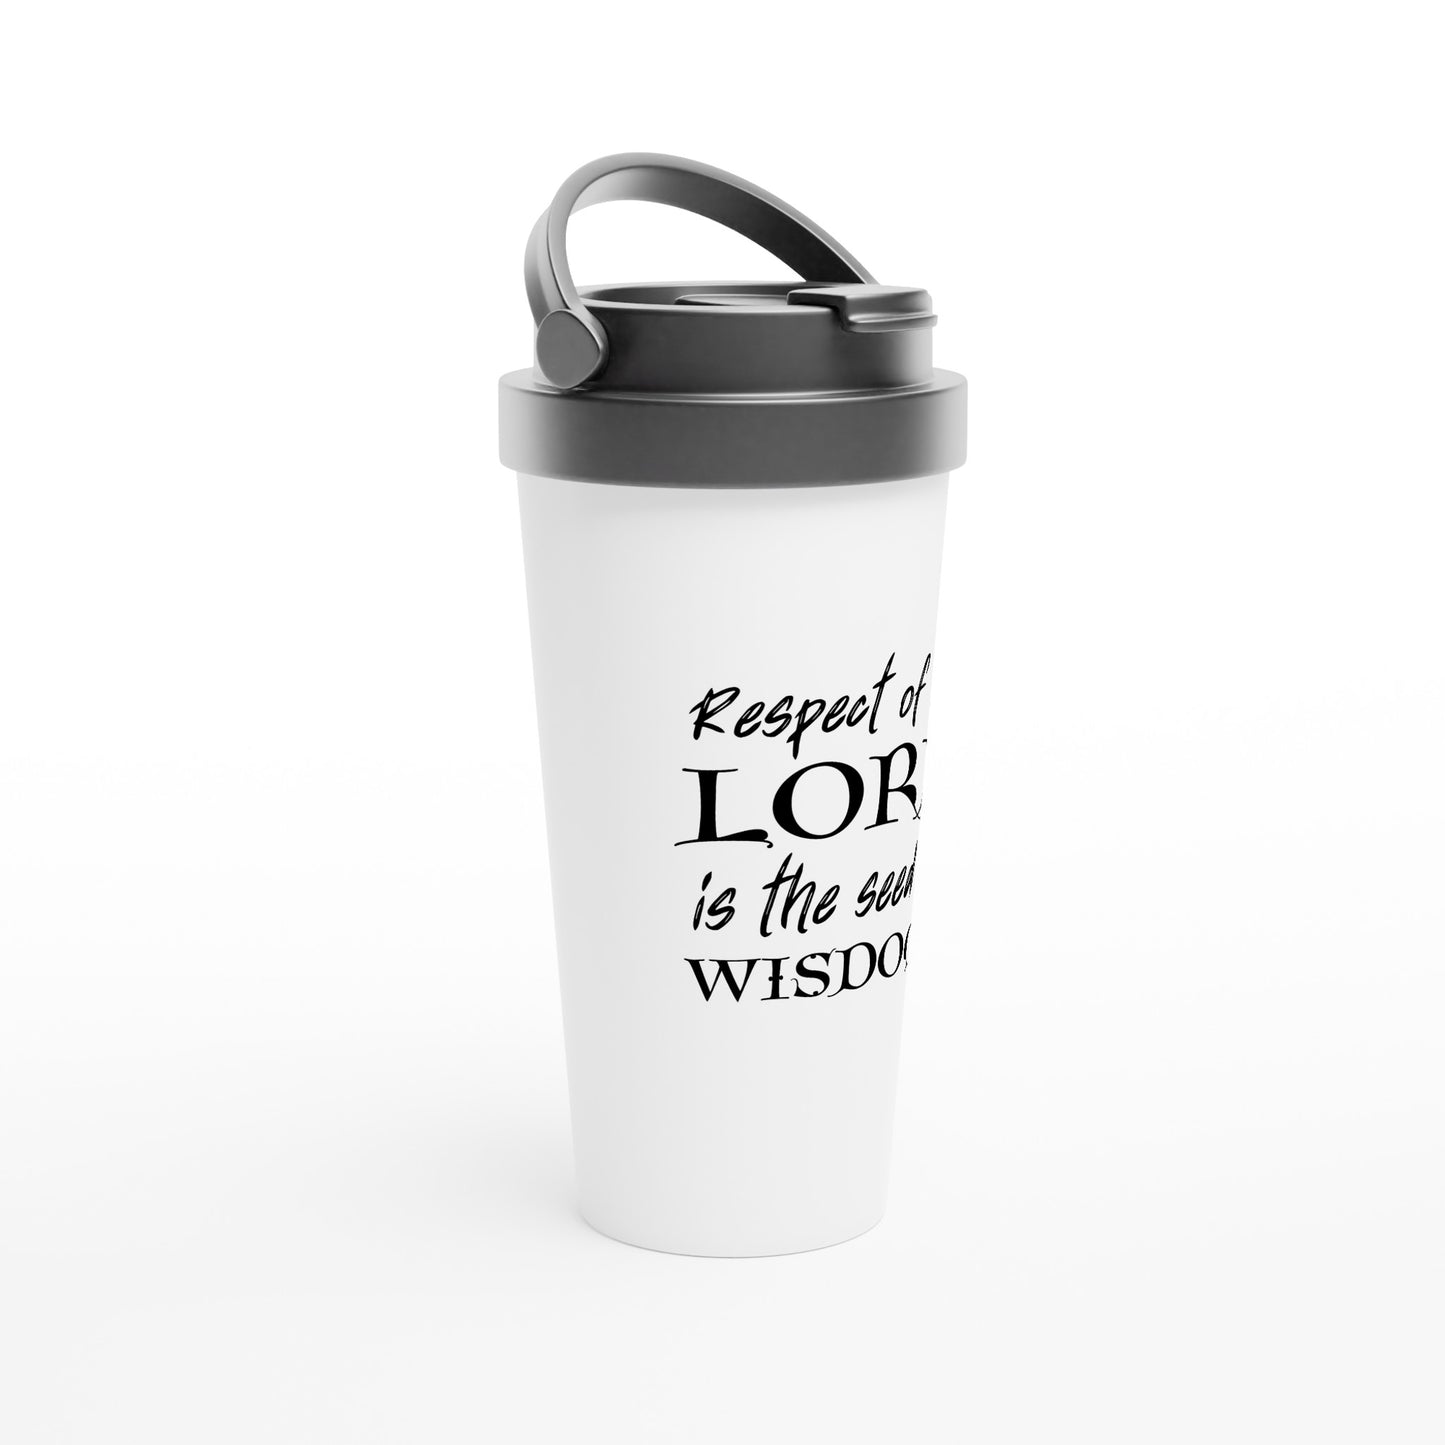 Respect of the Lord - White 15oz Stainless Steel Travel Mug